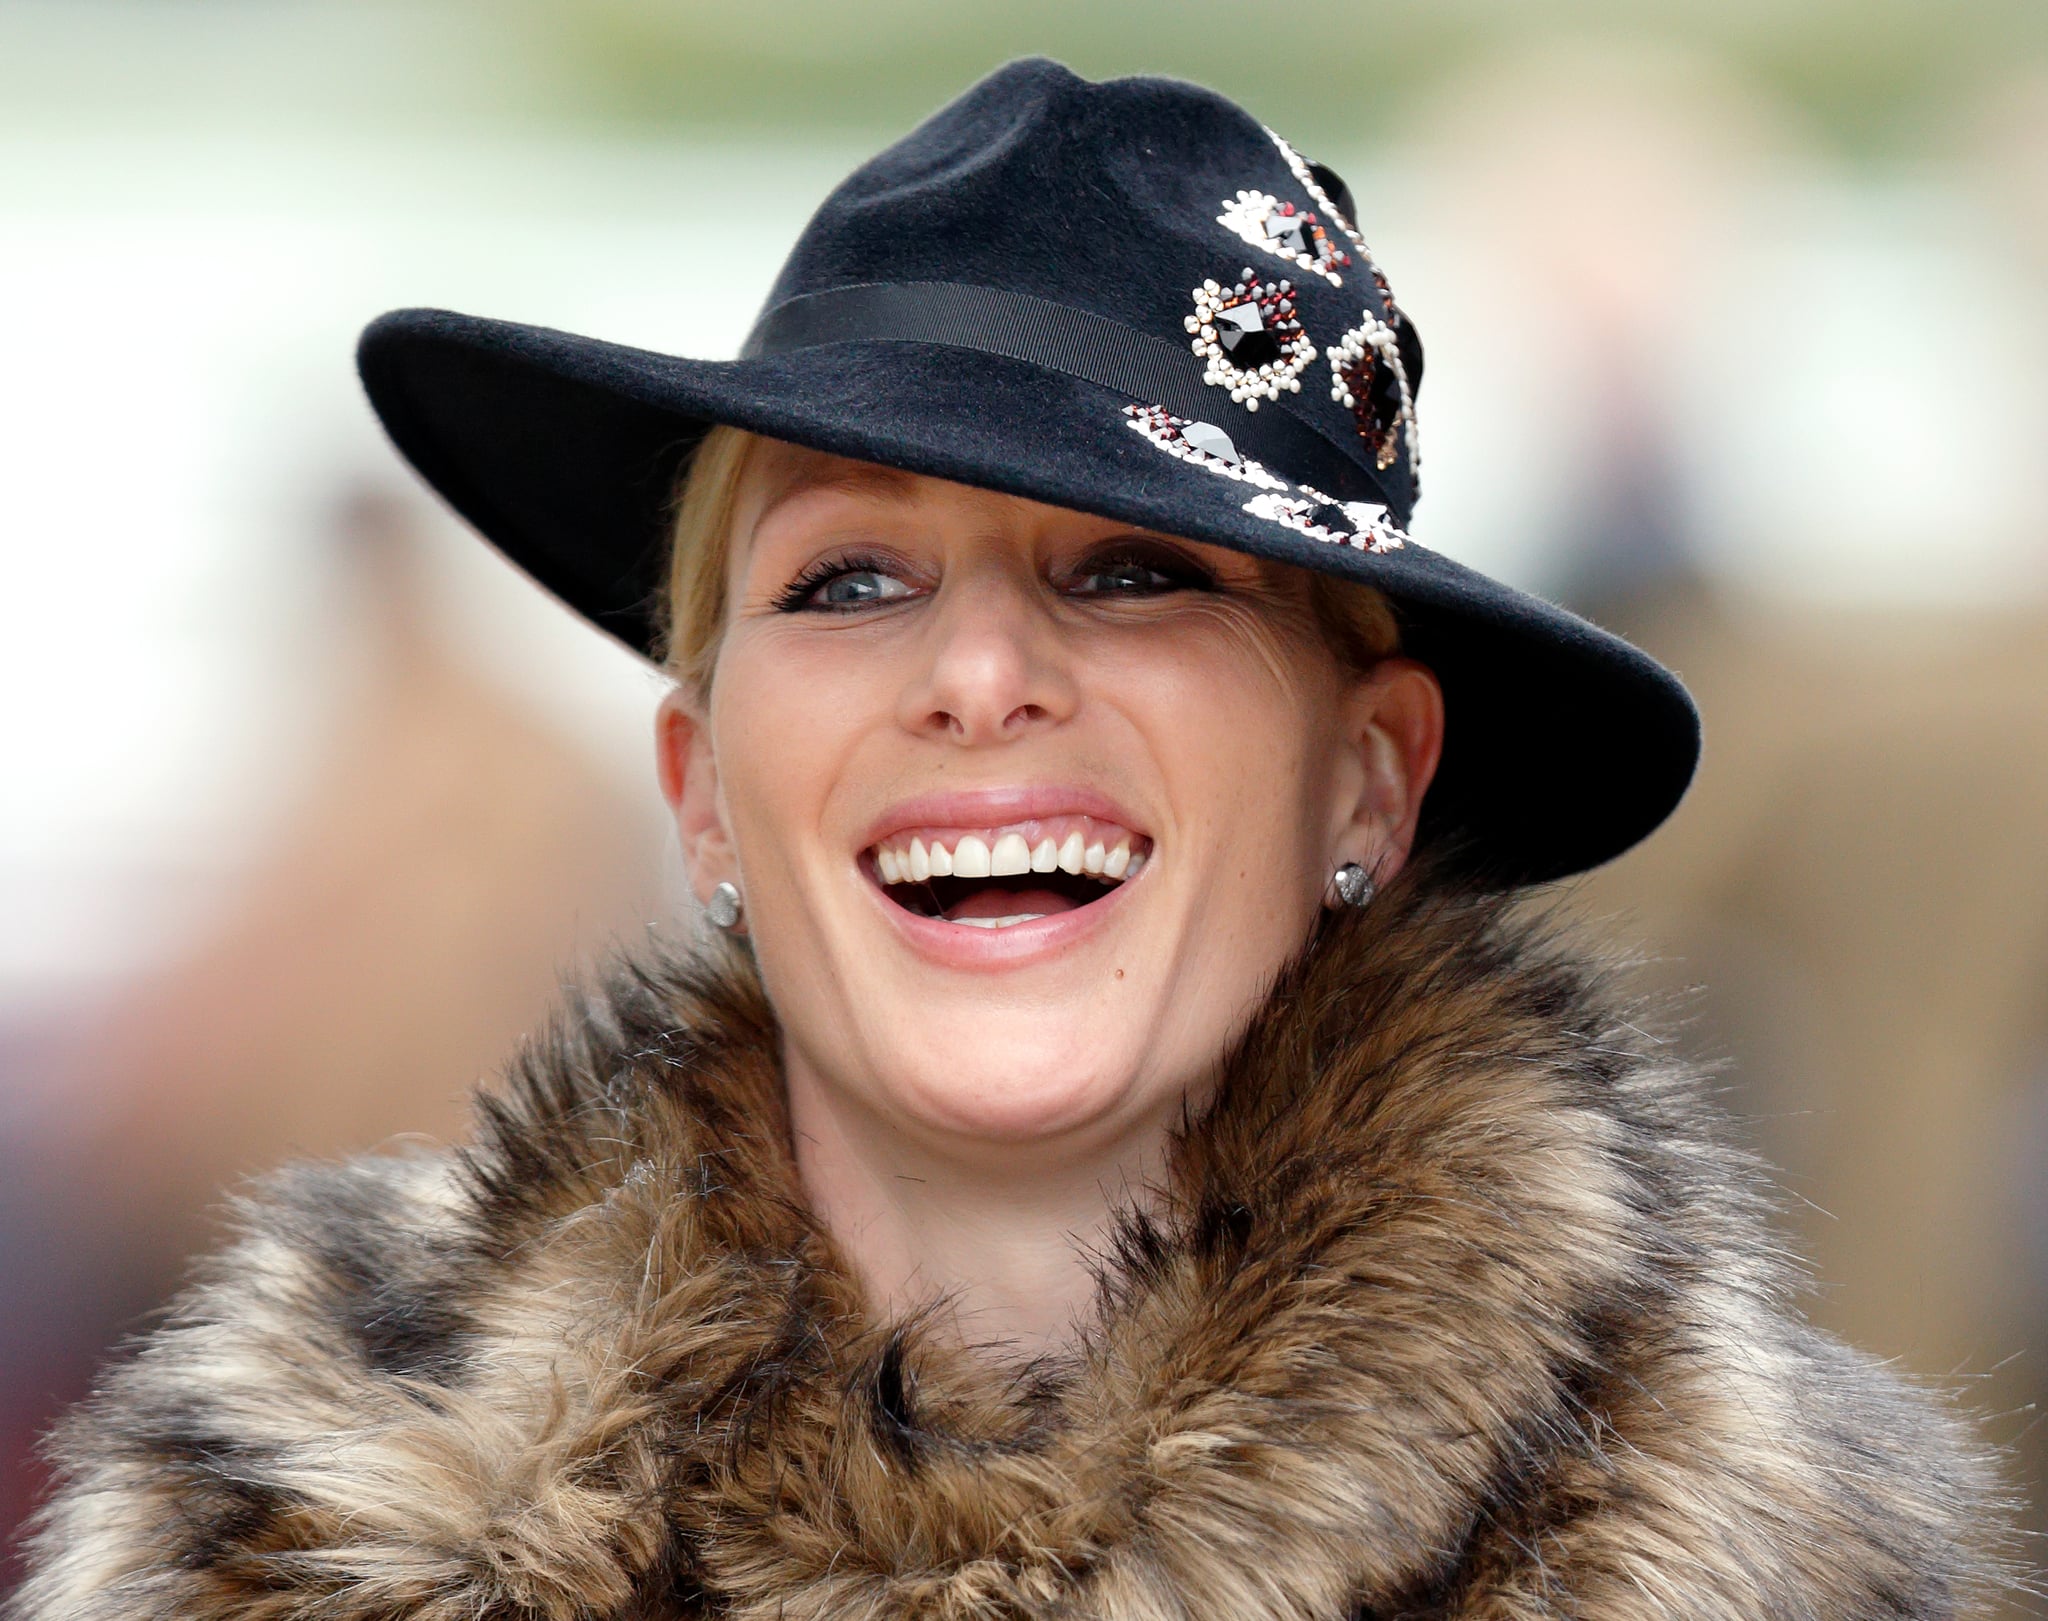 CHELTENHAM, UNITED KINGDOM - MARCH 16: (EMBARGOED FOR PUBLICATION IN UK NEWSPAPERS UNTIL 48 HOURS AFTER CREATE DATE AND TIME) Zara Phillips attends day 3 of the Cheltenham Festival at Cheltenham Racecourse on March 16, 2017 in Cheltenham, England. (Photo by Max Mumby/Indigo/Getty Images)